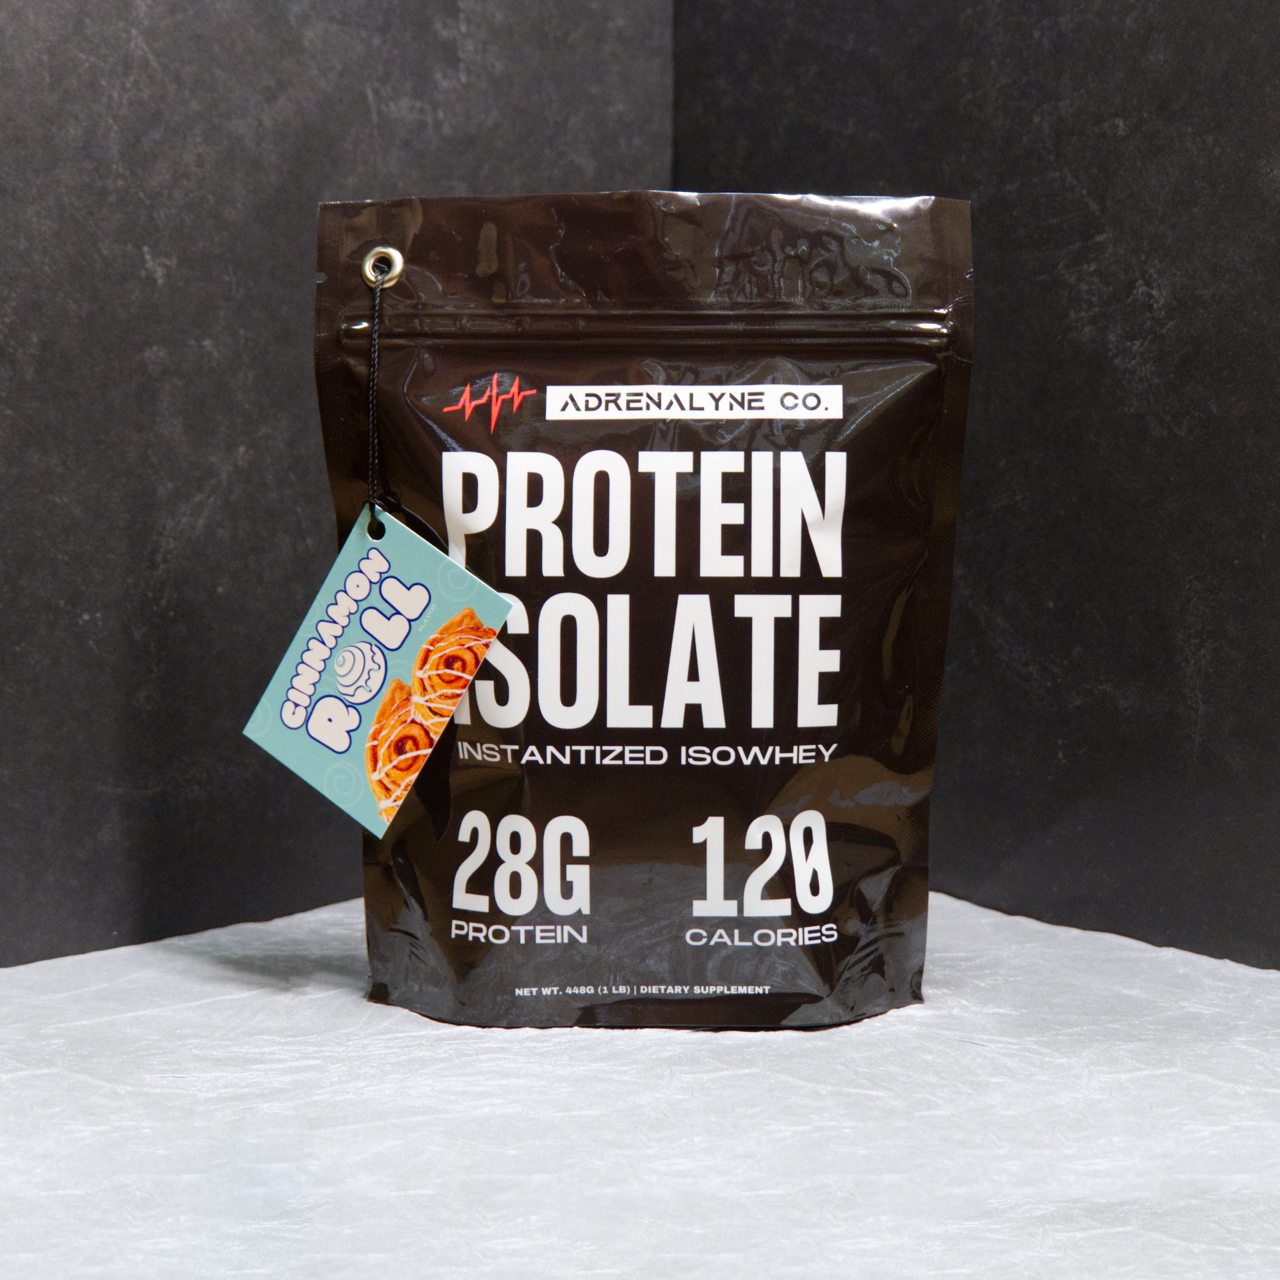 Protein Isolate